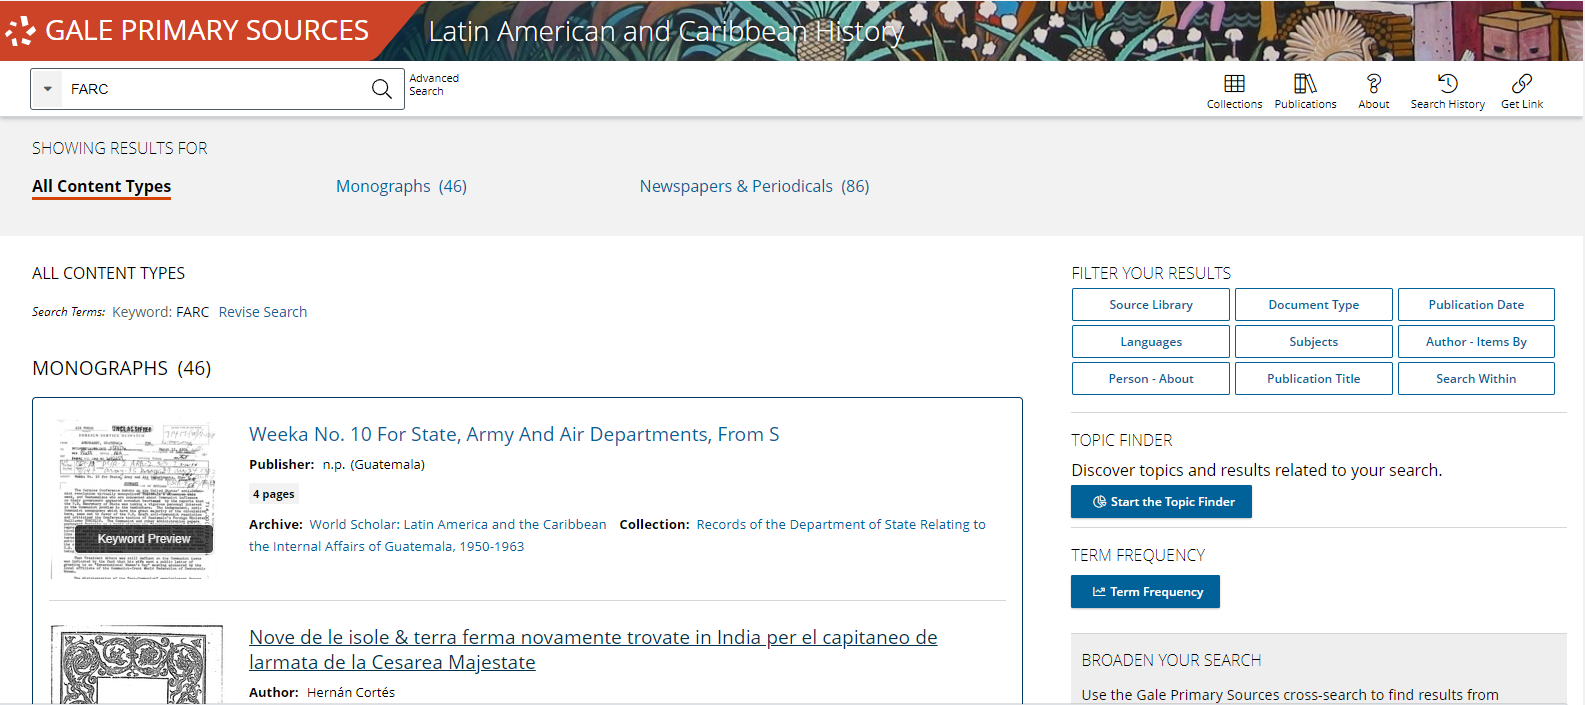 Screen shot of Archives of Latin America and Caribbean History, Sixteenth to Twentieth Century search results